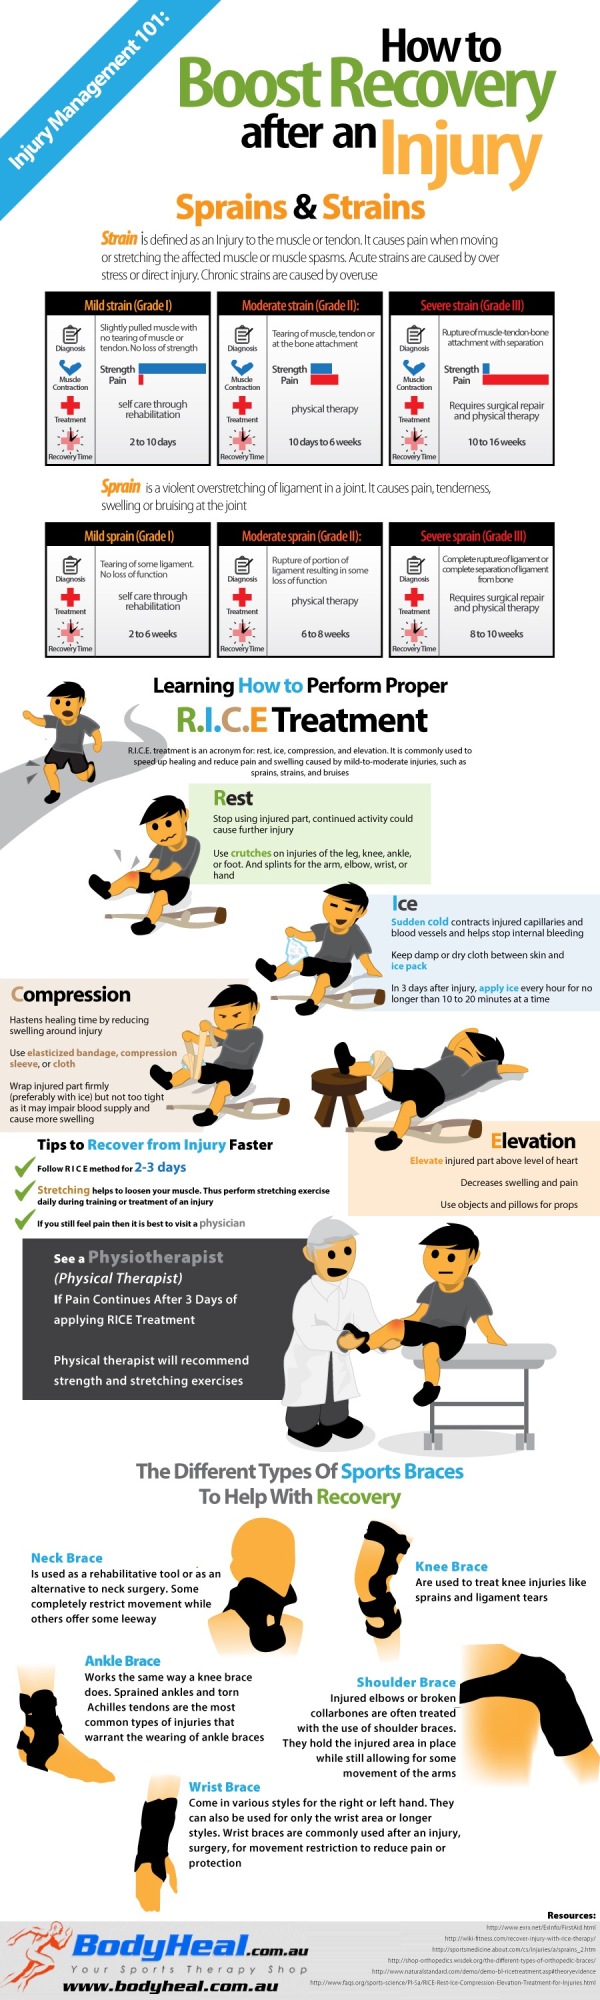 How To Boost Recovery After An Injury infographic